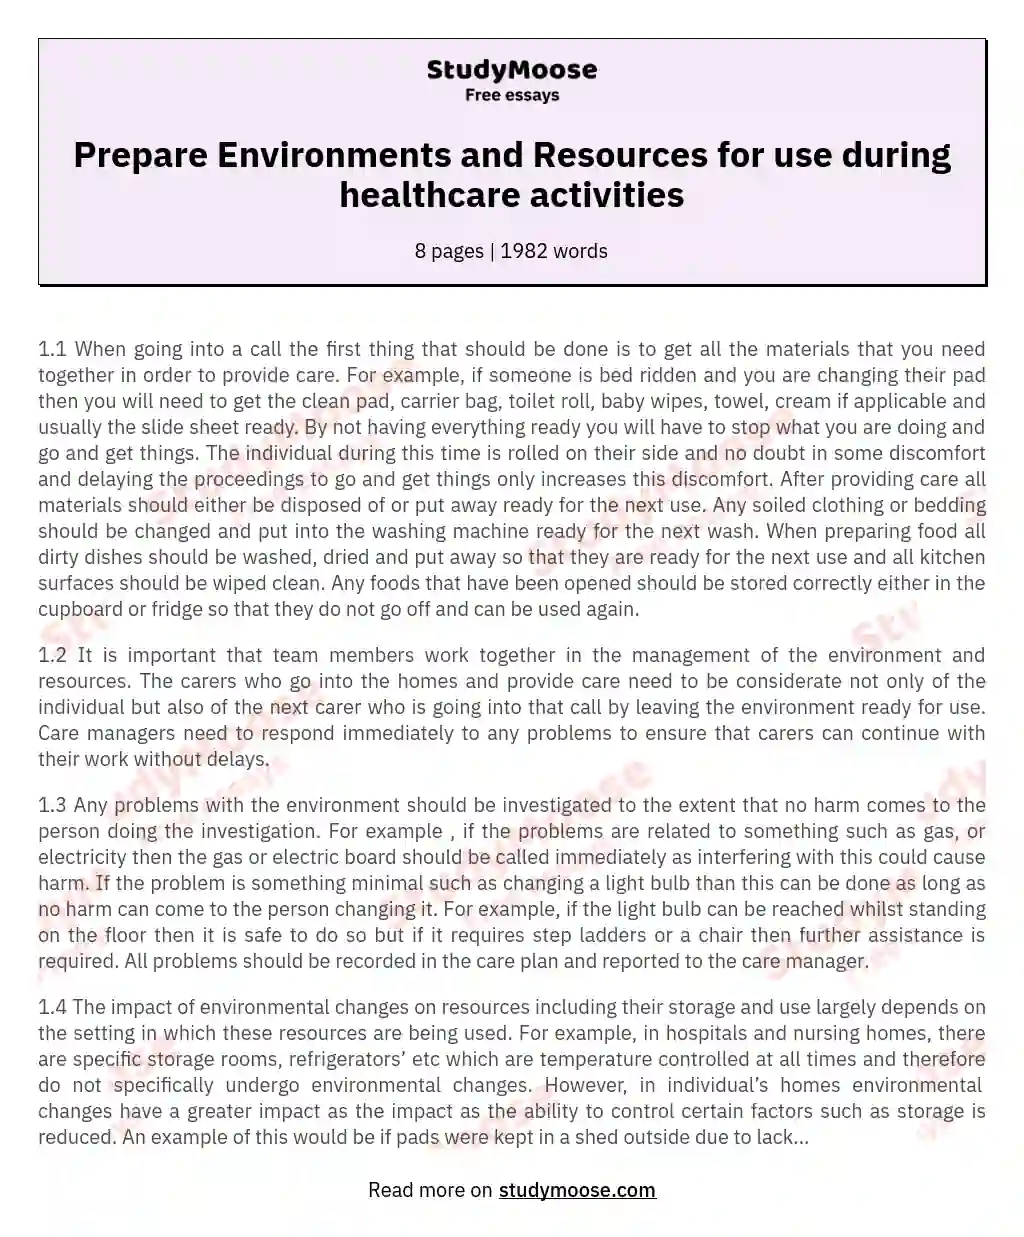 Prepare Environments and Resources for use during healthcare activities essay